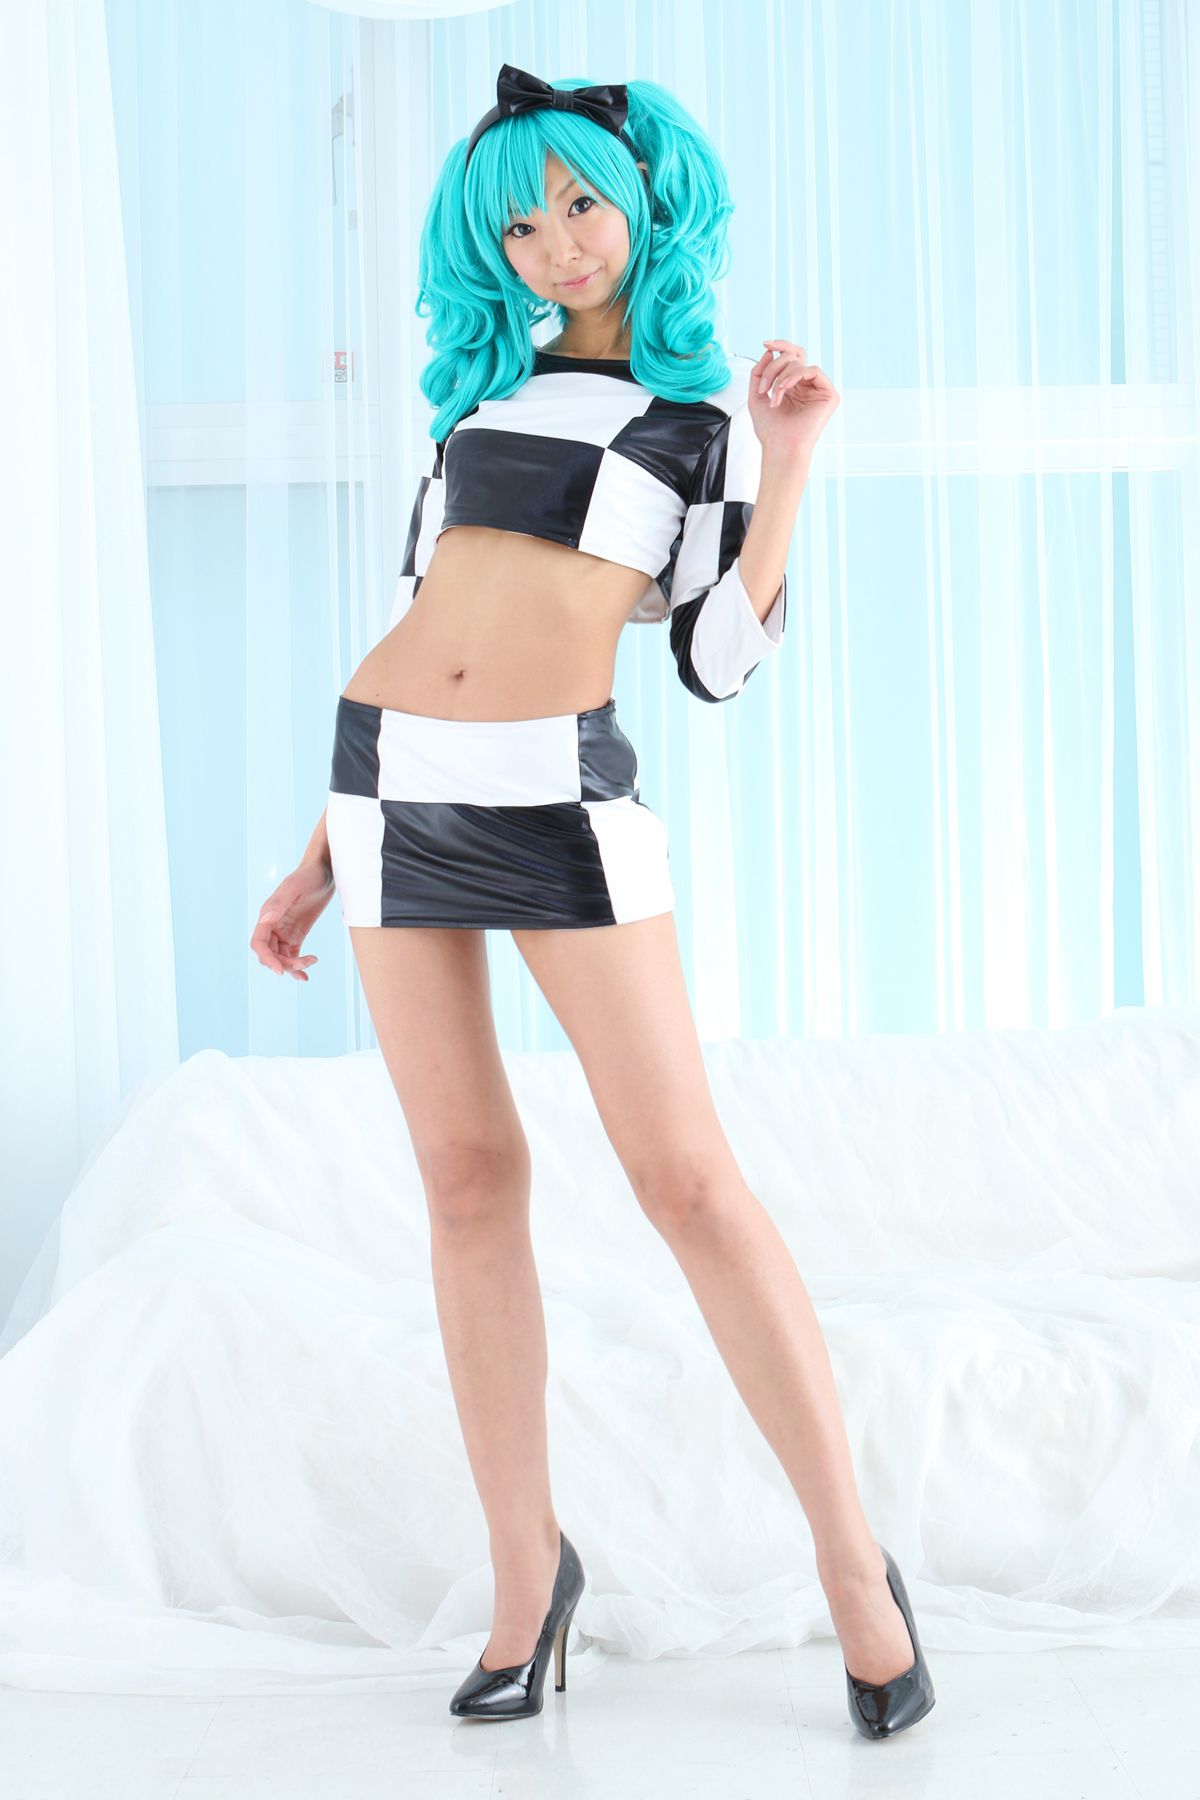 taotuhome[Cosplay套图] New Hatsune Miku from Vocaloid - So Sexy第36张